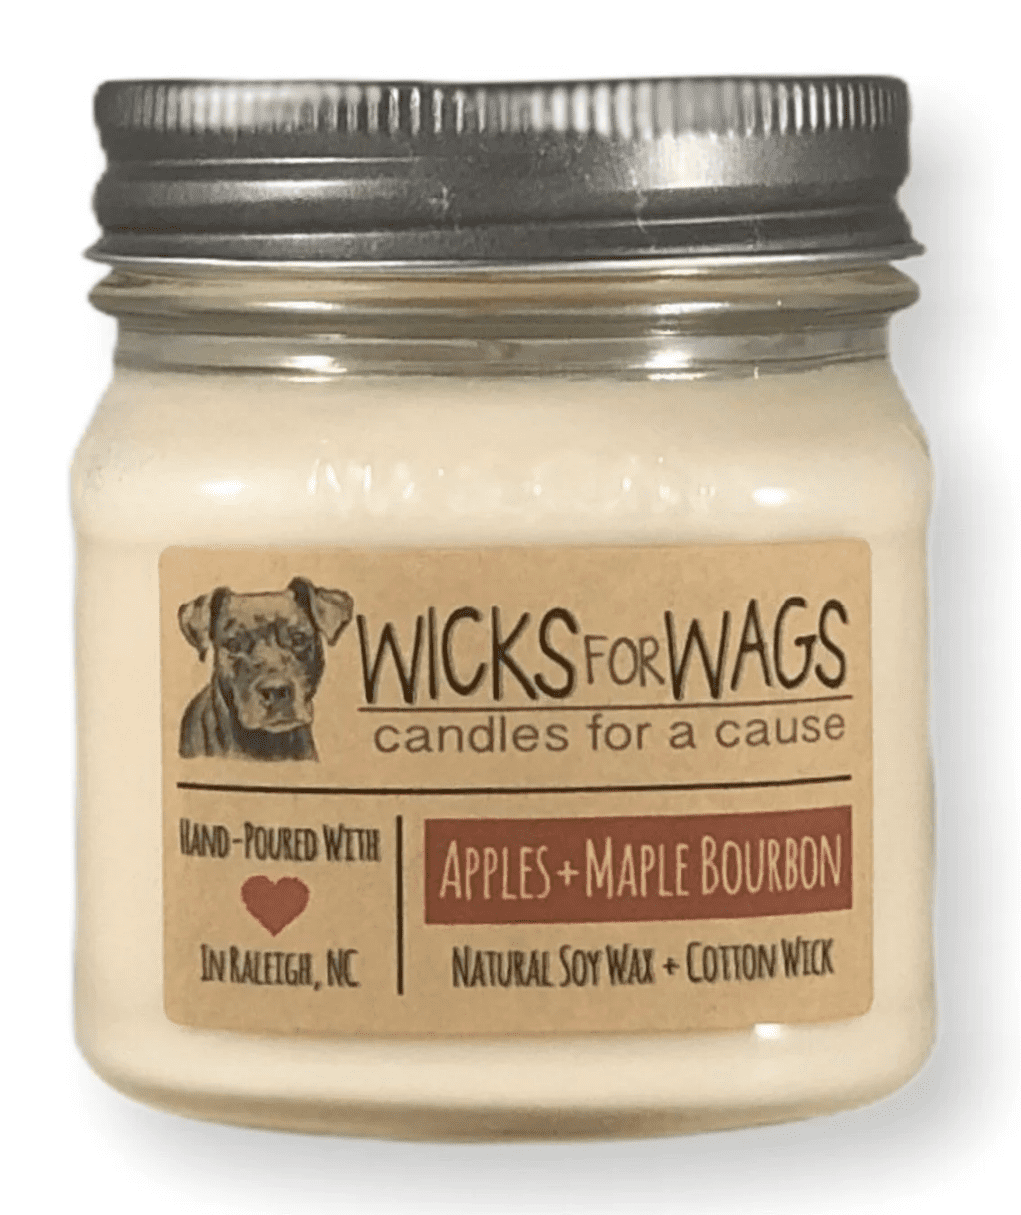 Wicks for Wags Soy Candles